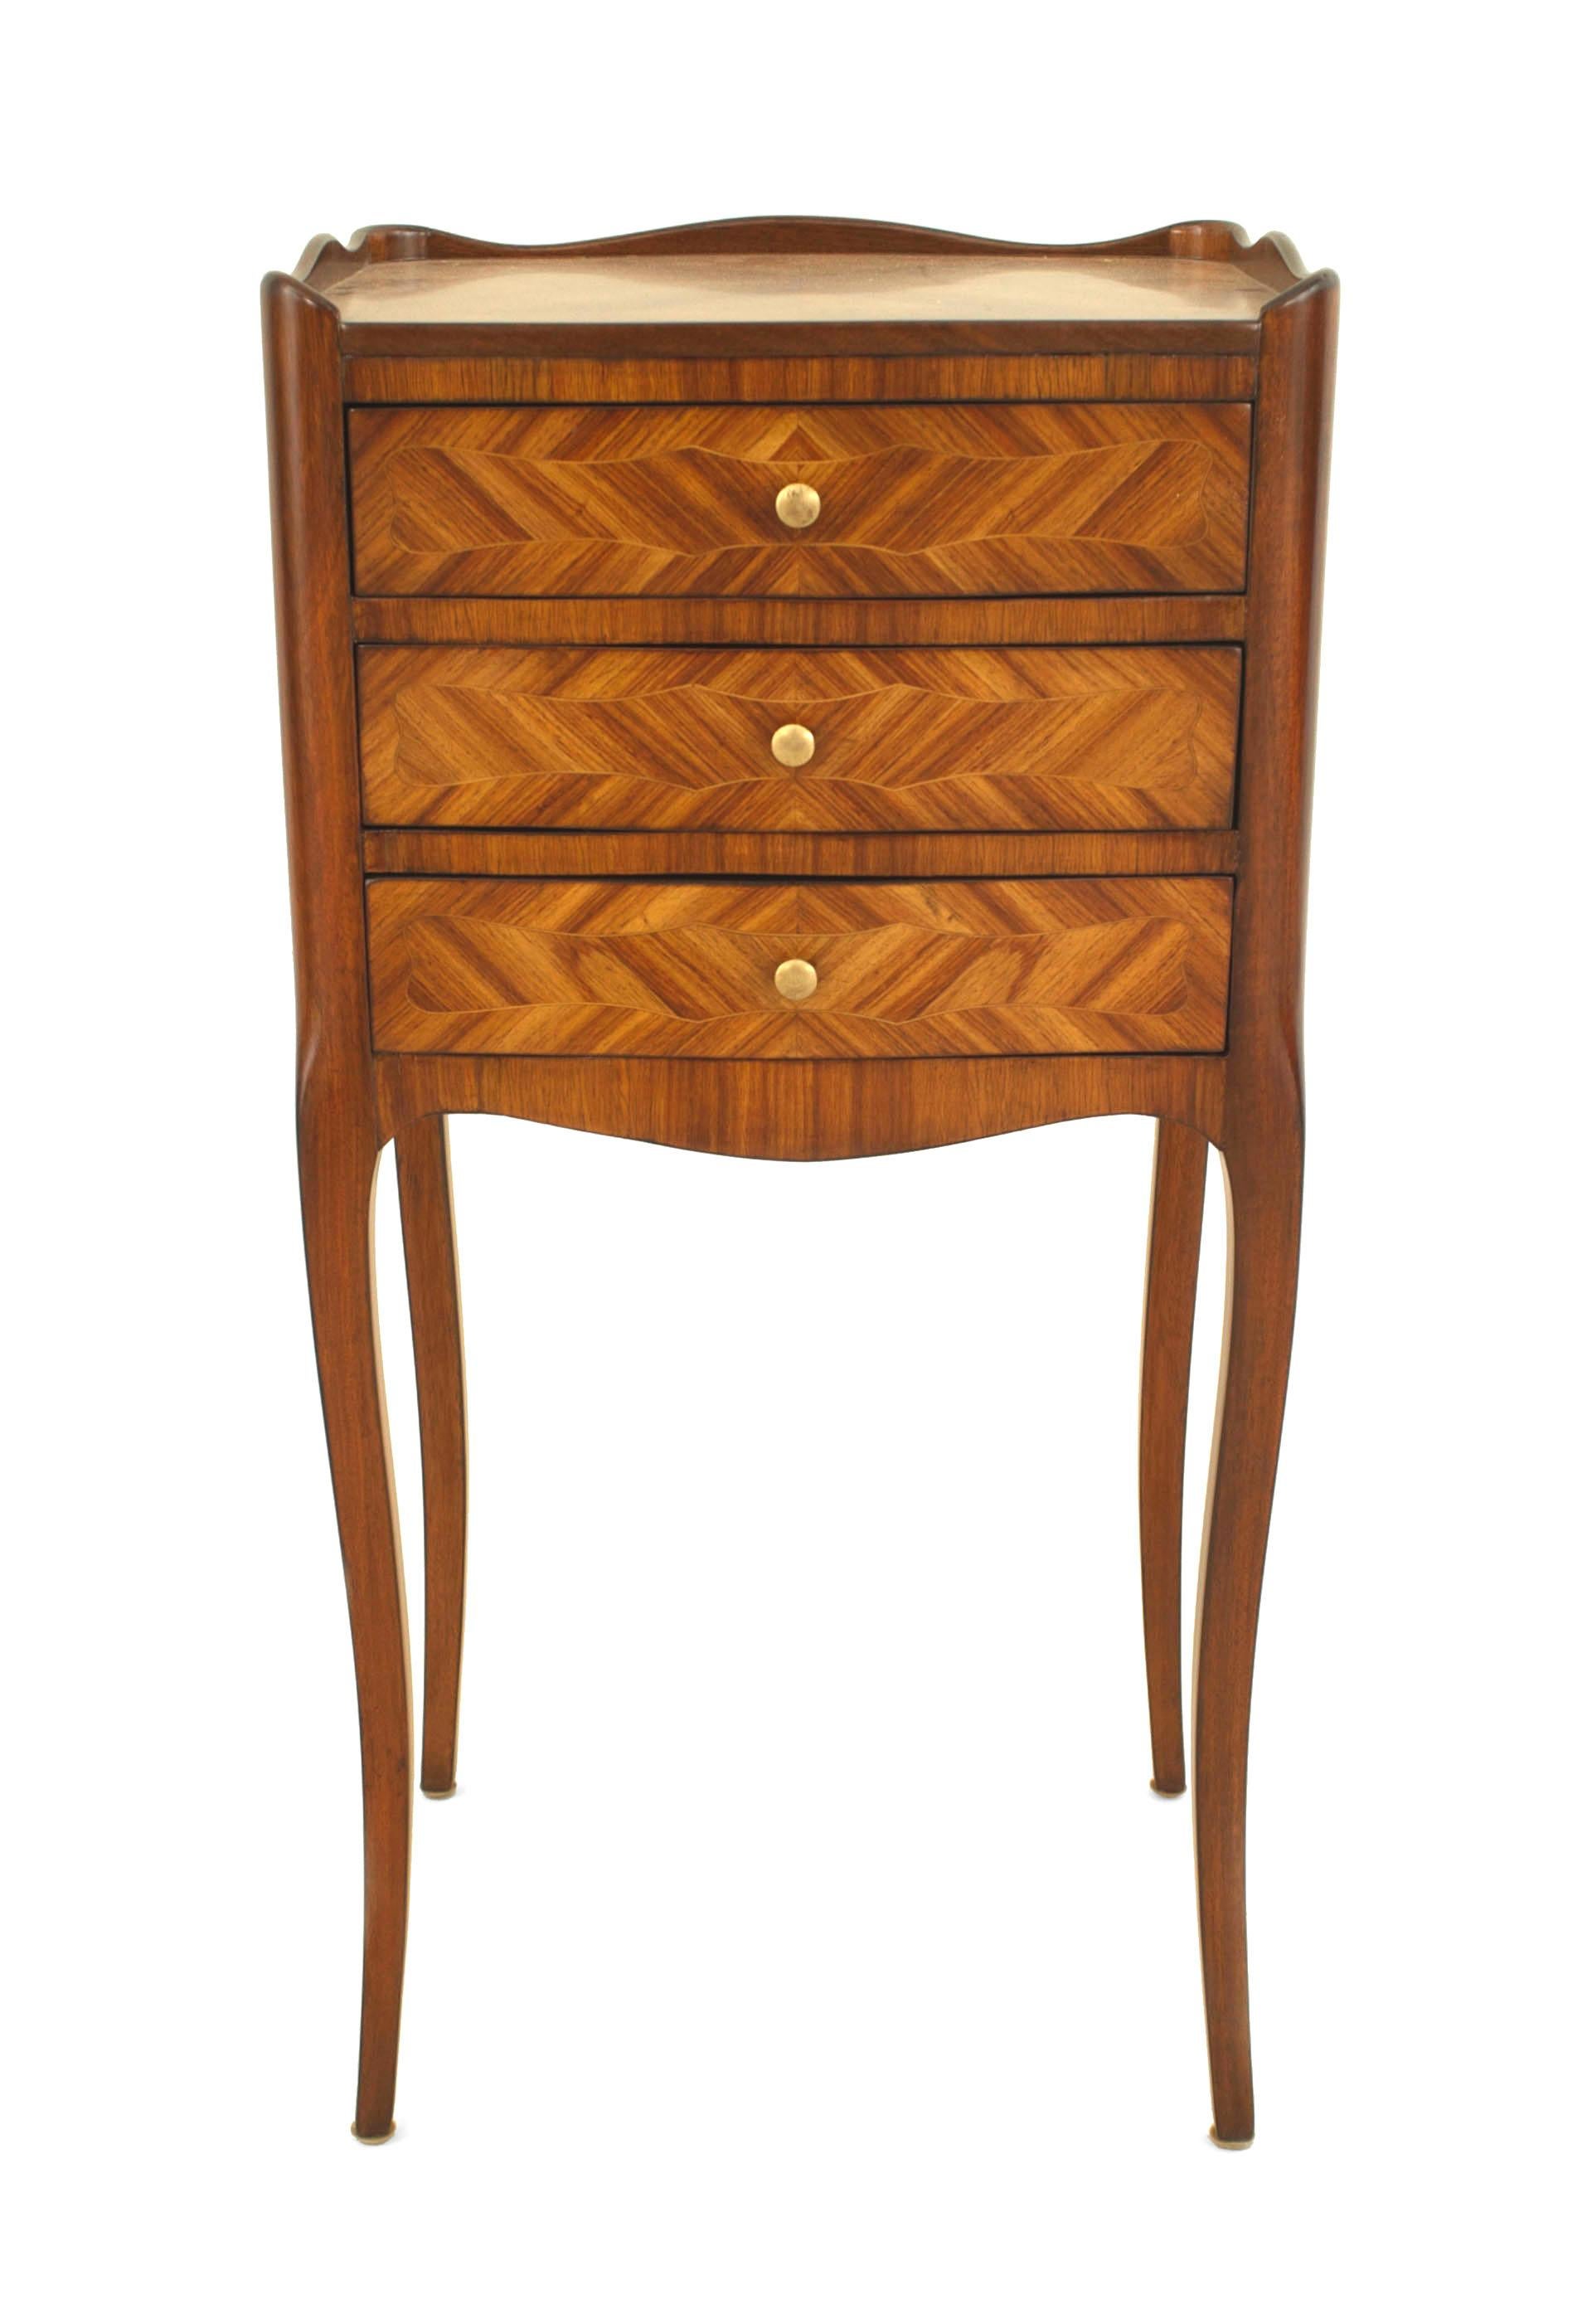 French Louis XV-style (20th Century) tulipwood veneered small bedside table / commode with a gallery and three drawers.
